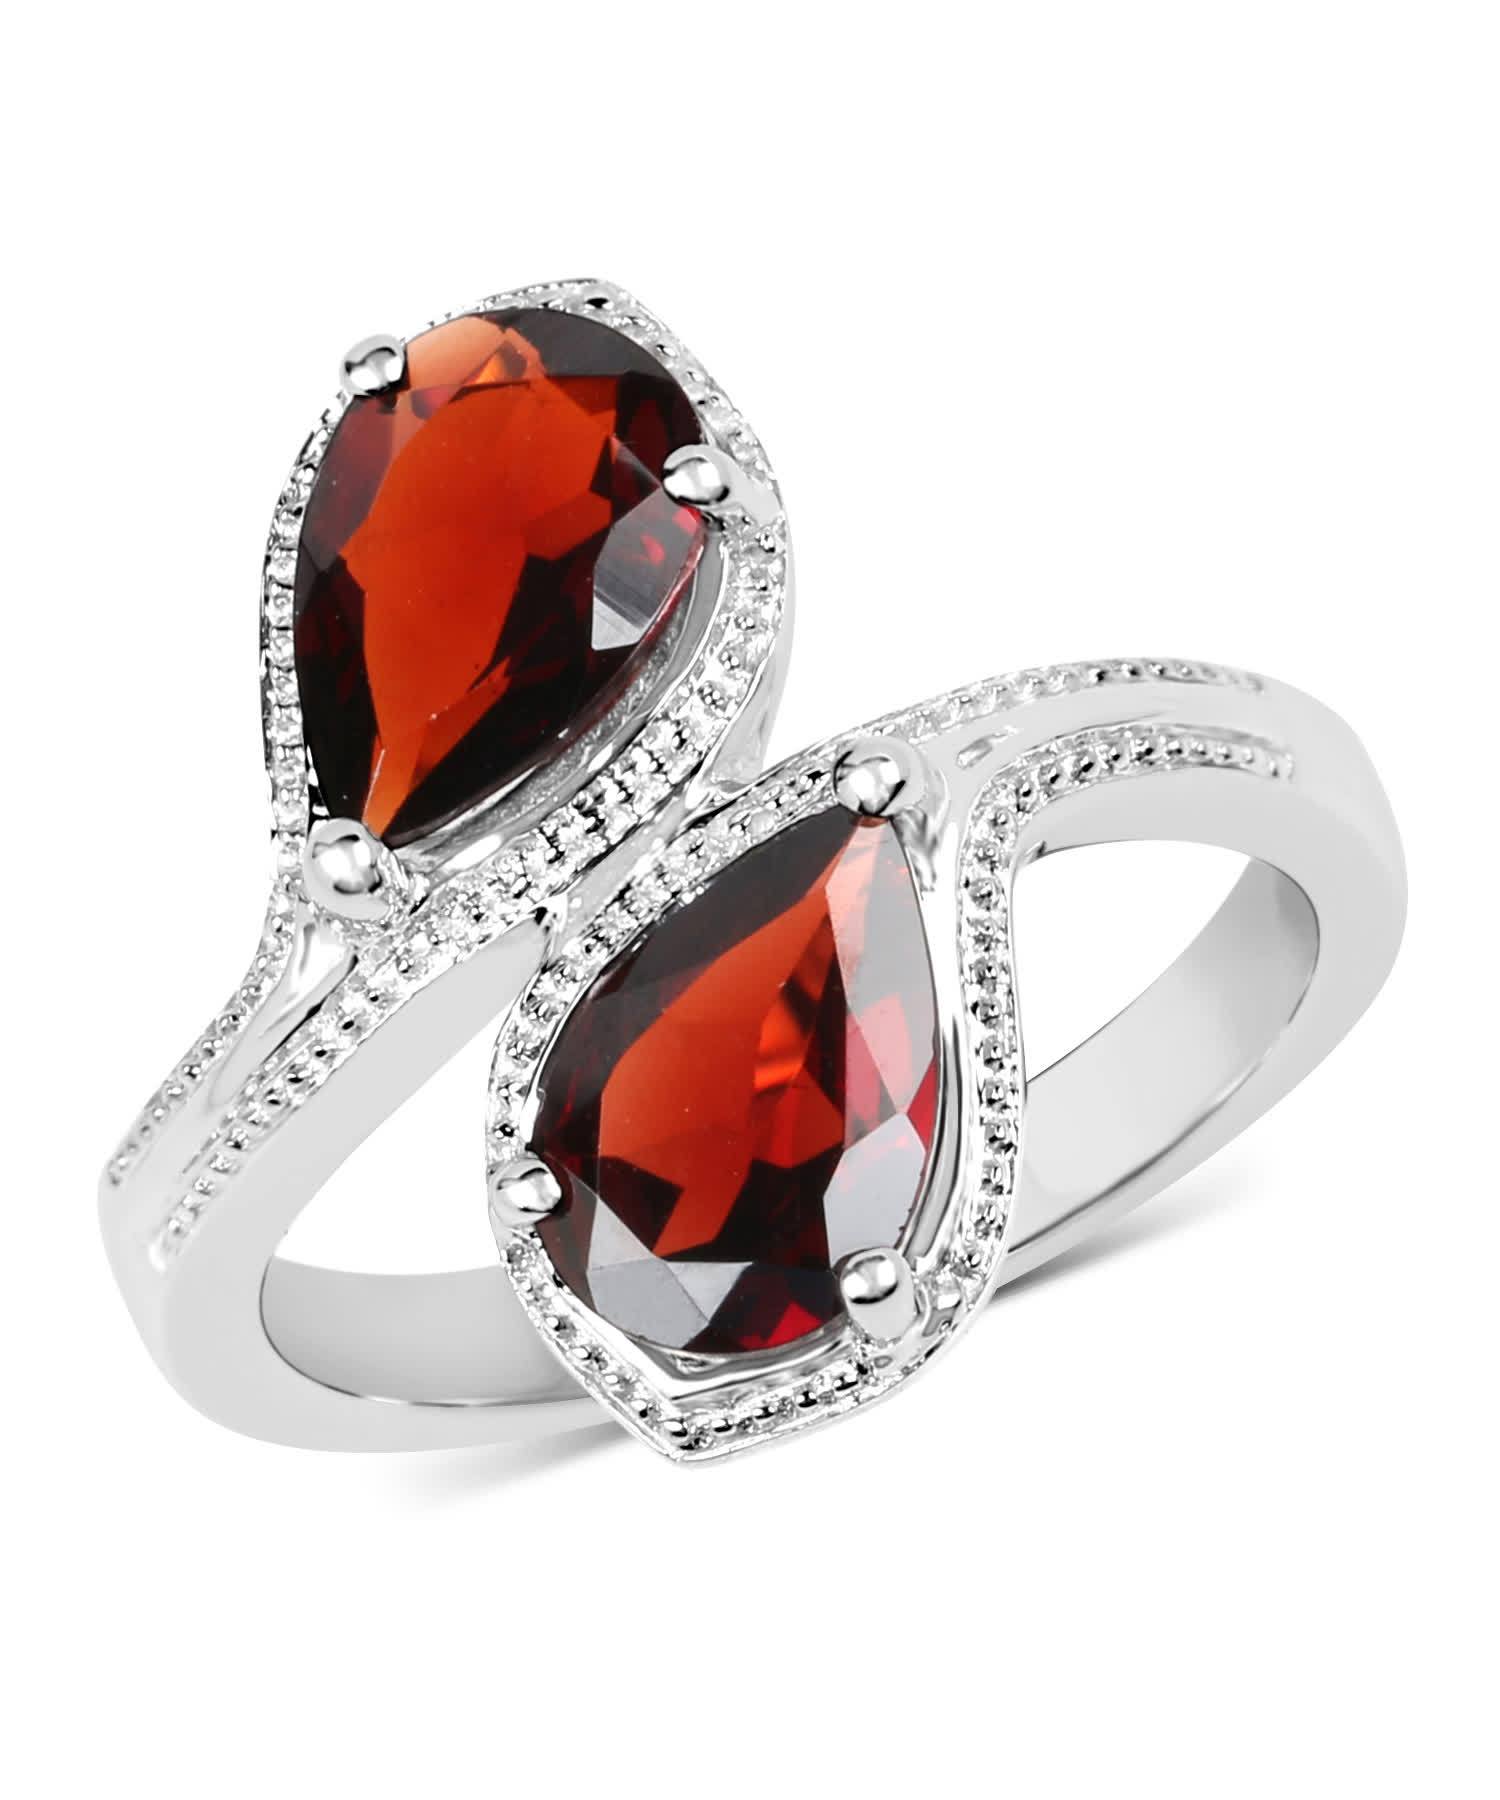 2.60ctw Natural Garnet Rhodium Plated 925 Sterling Silver Two-Stone Ring View 1